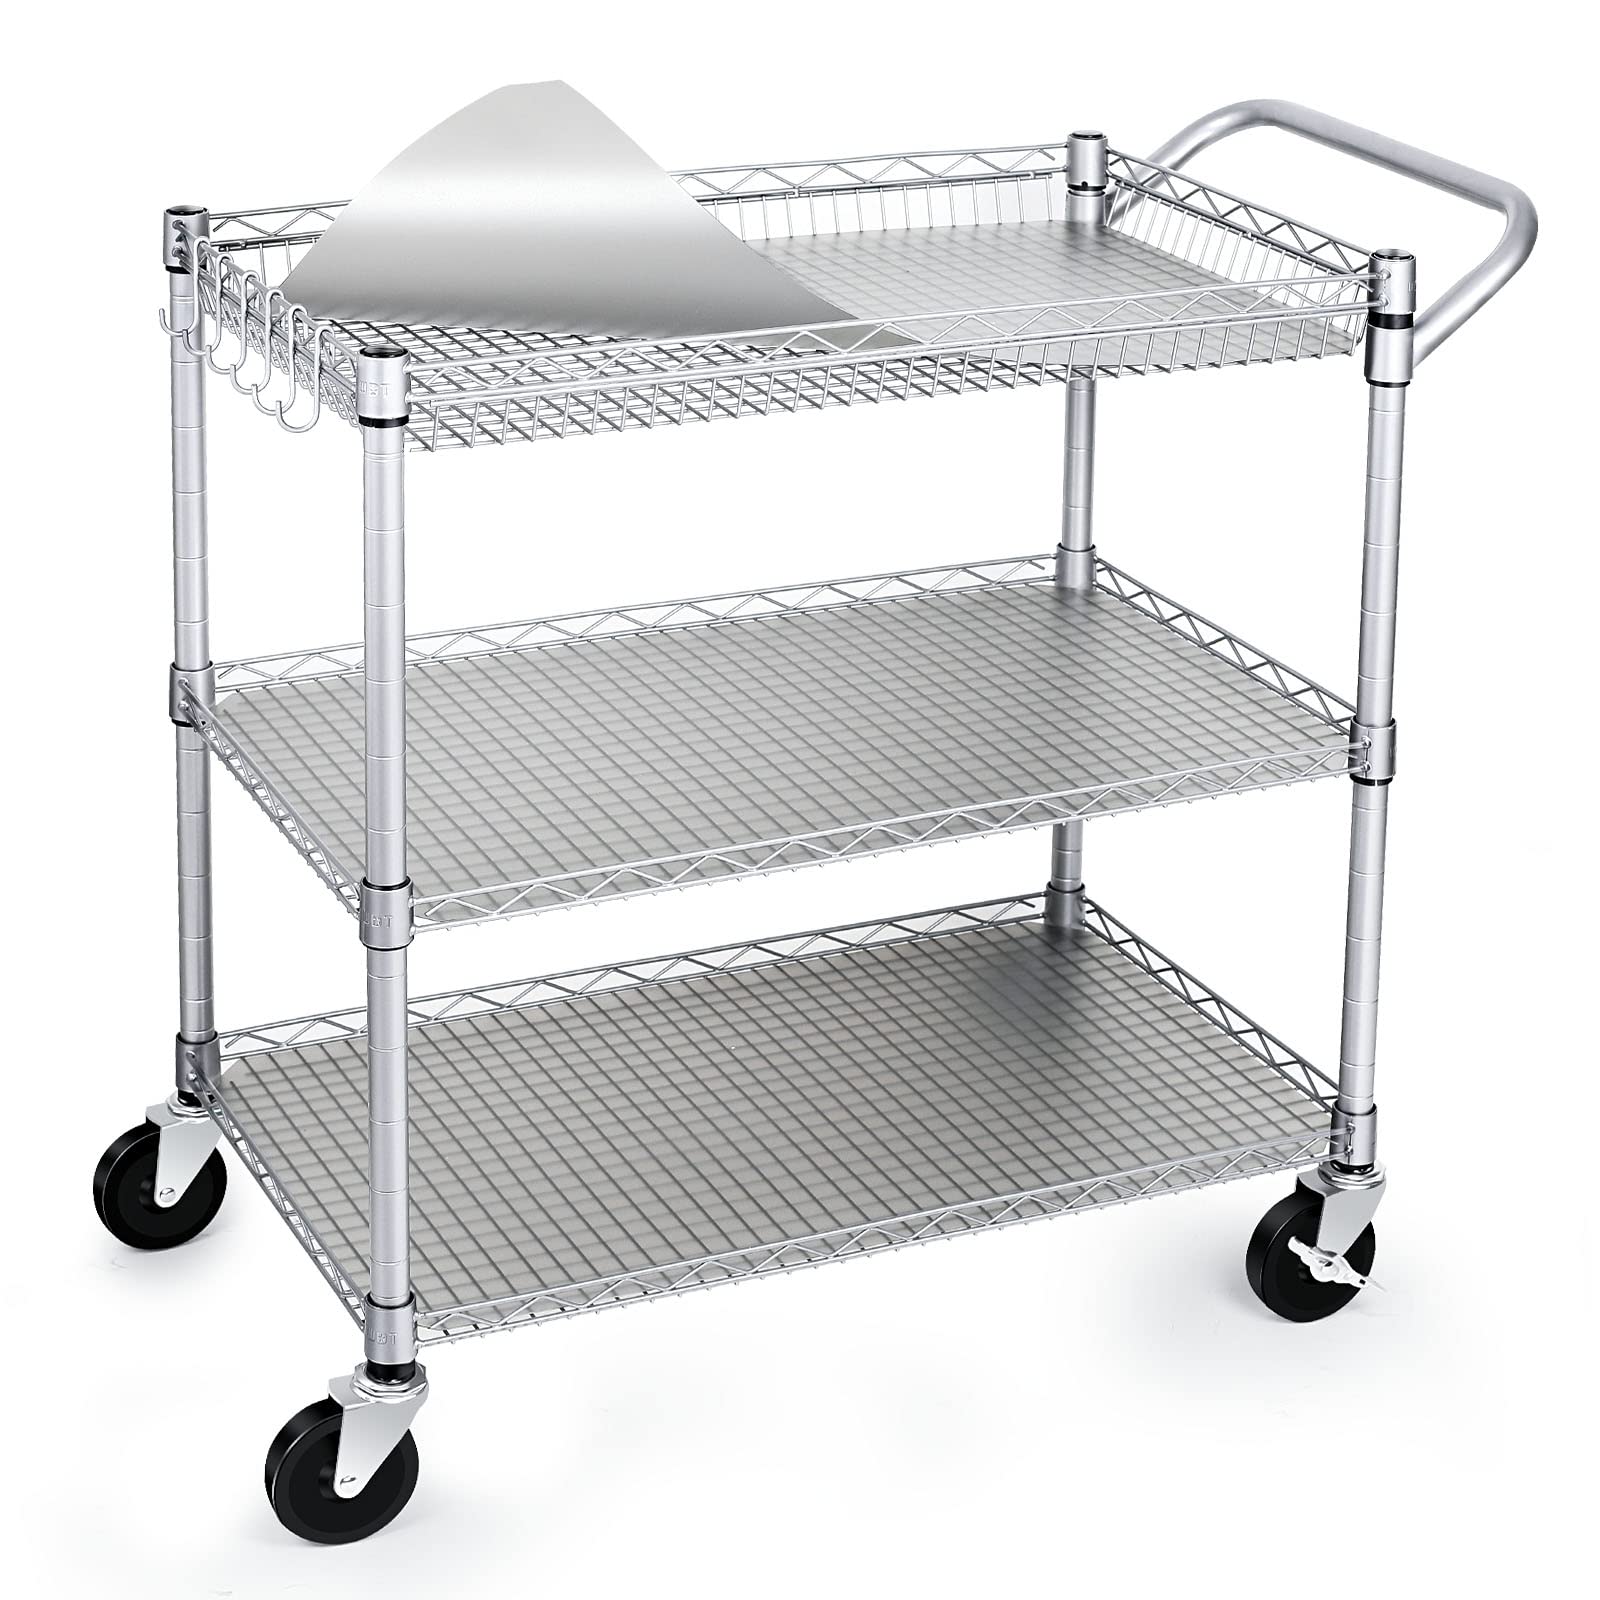 What is a utility cart used for?